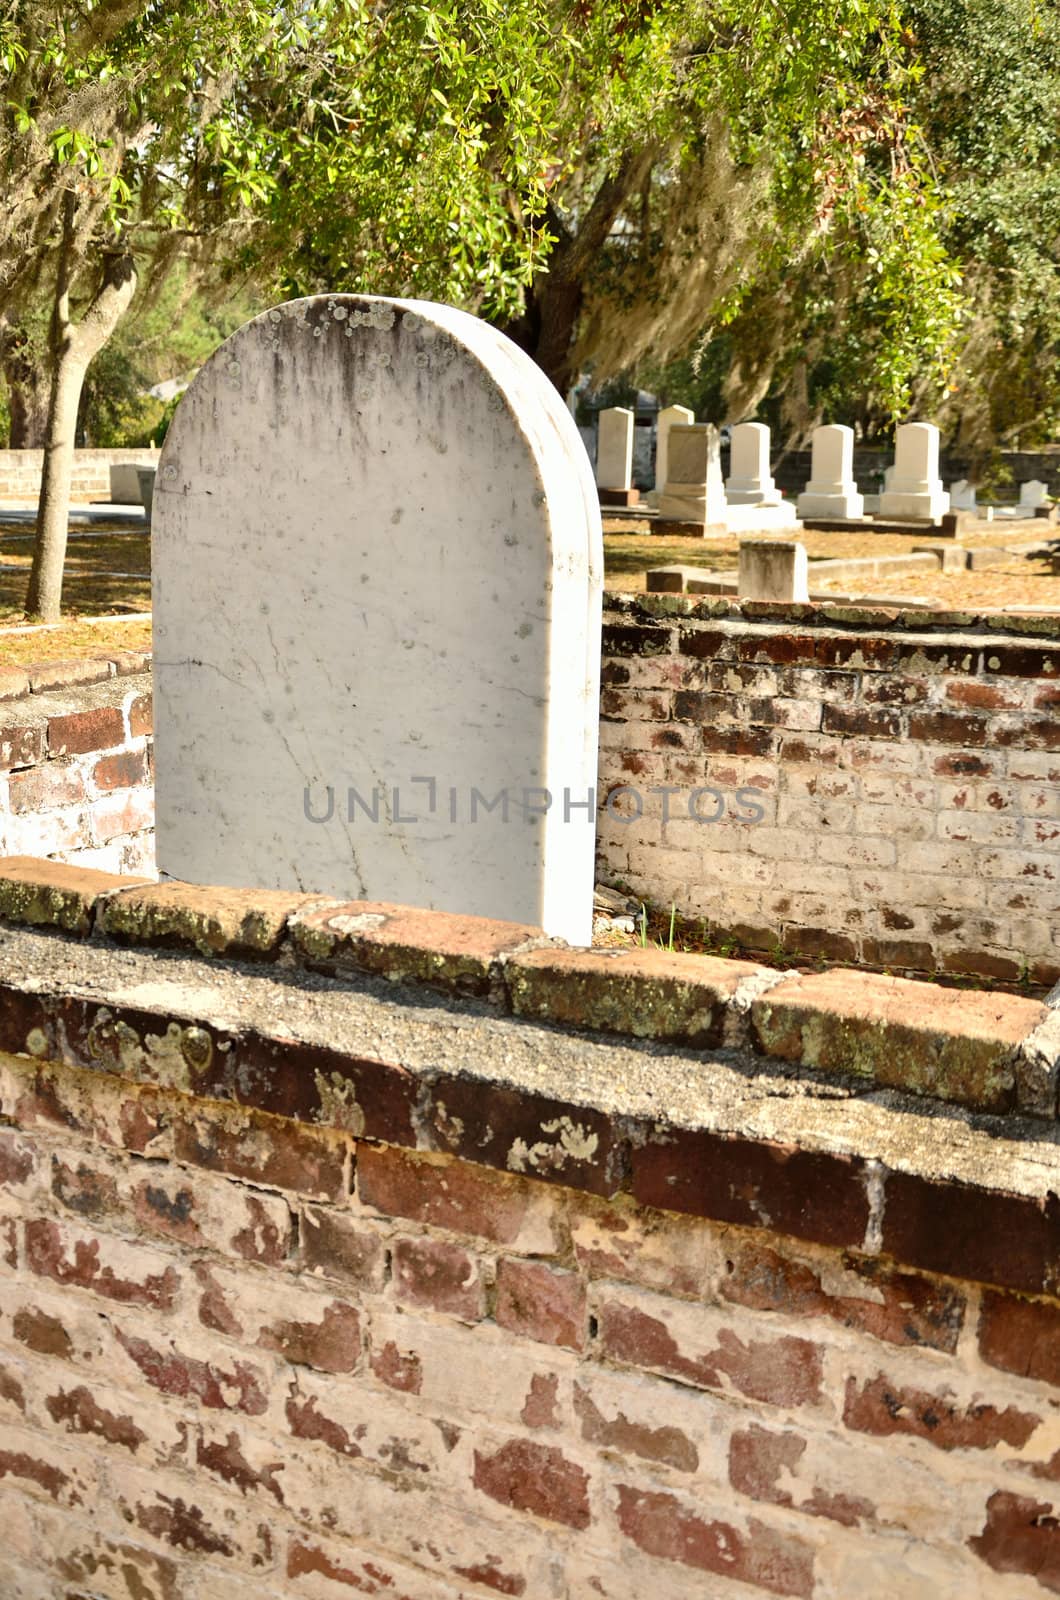 Traditionally shaped tombstone stands out in this old cemetery